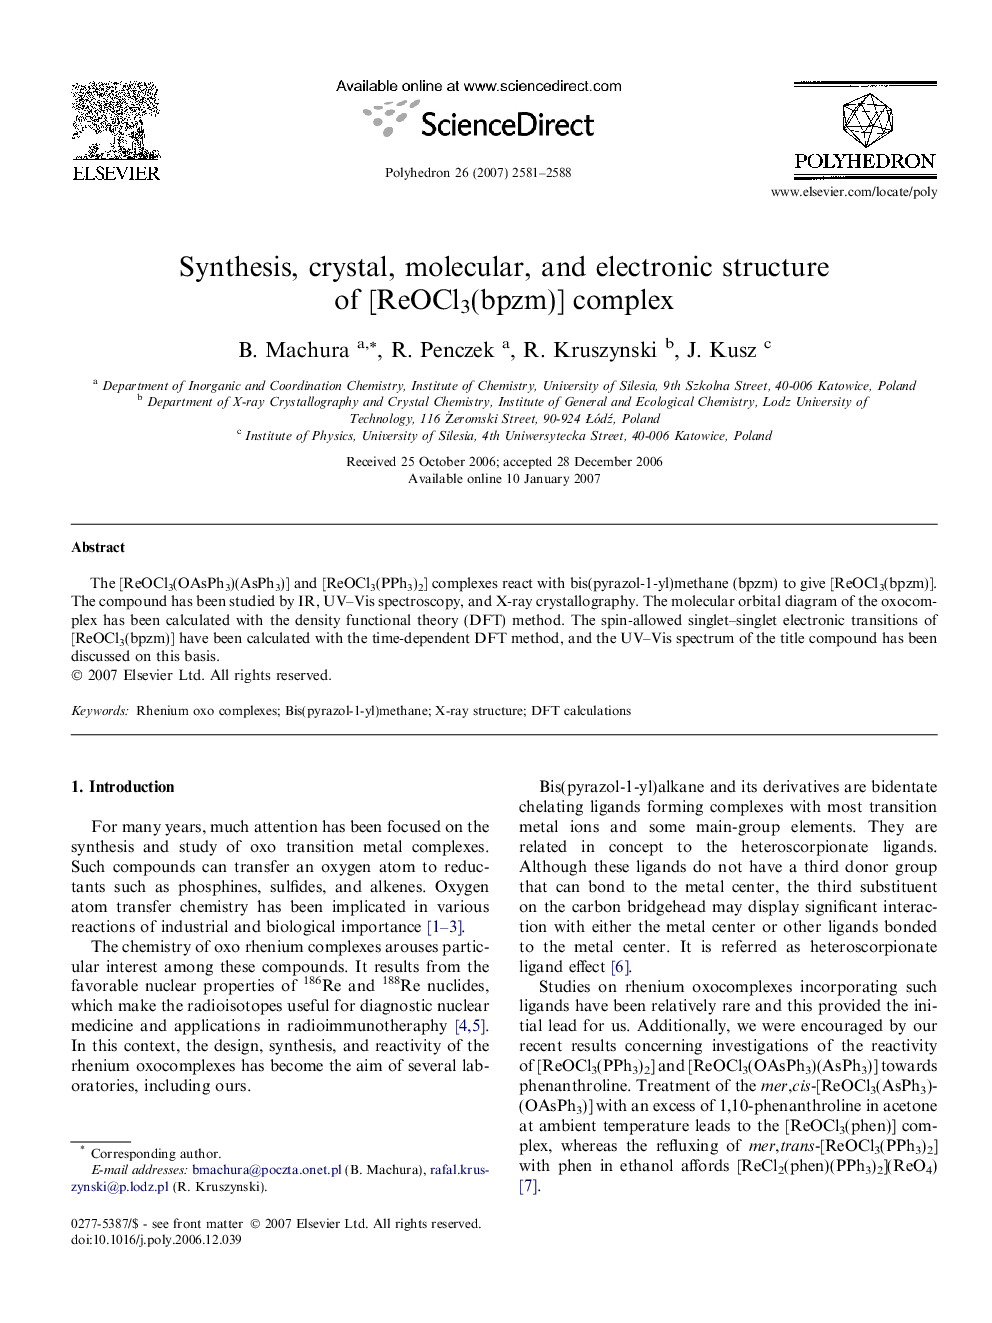 Synthesis, crystal, molecular, and electronic structure of [ReOCl3(bpzm)] complex